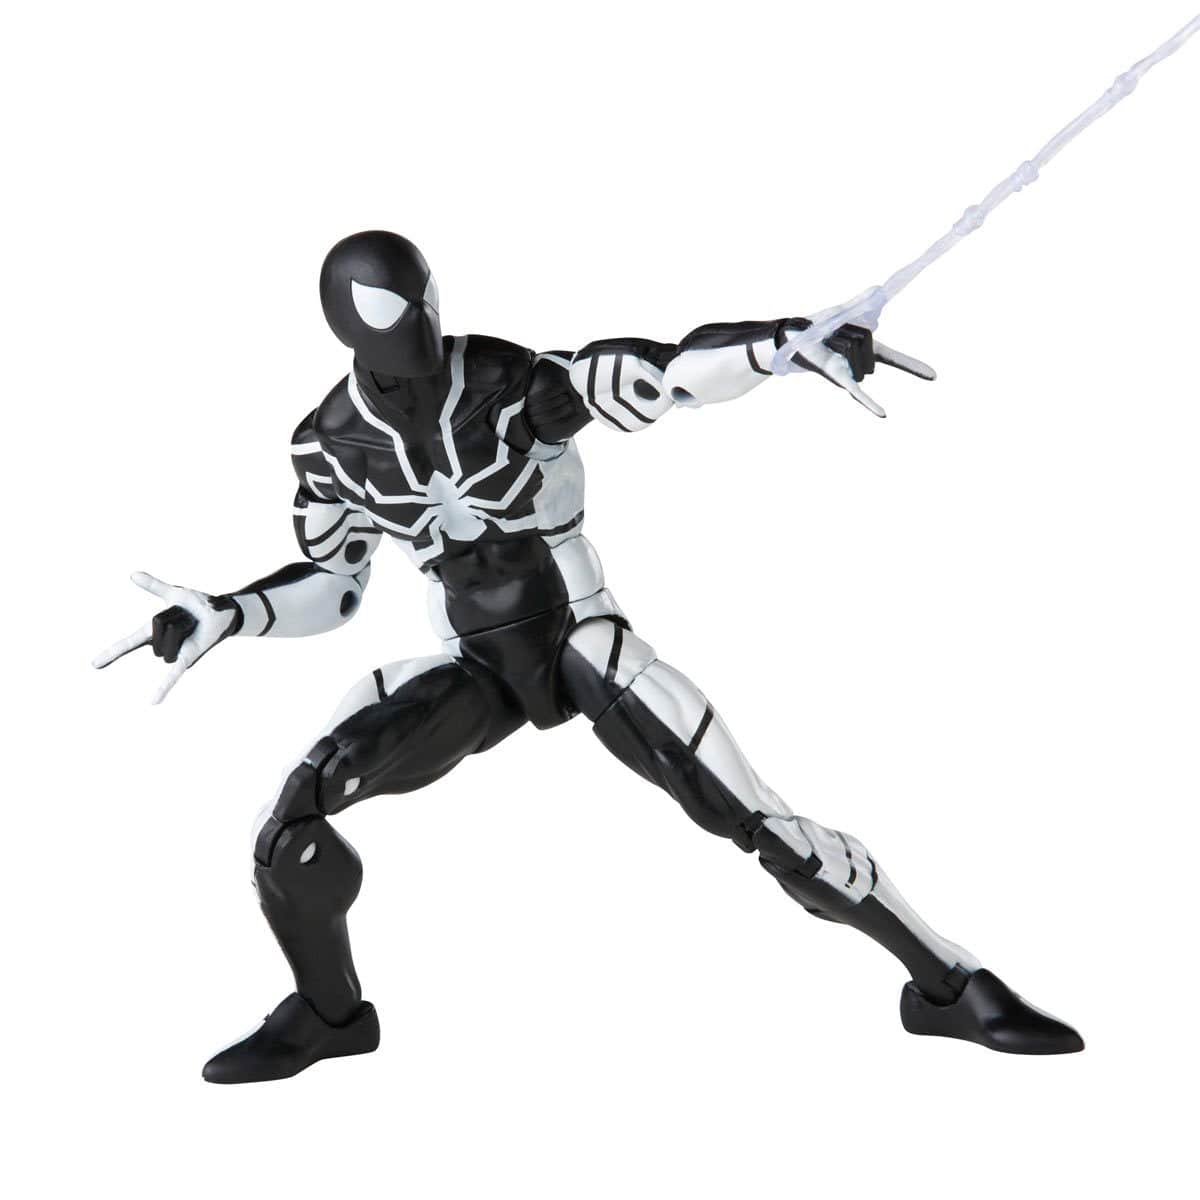 Future Foundation Spider-Man Stealth Suit Hasbro Marvel Legends Series Action Figure with web